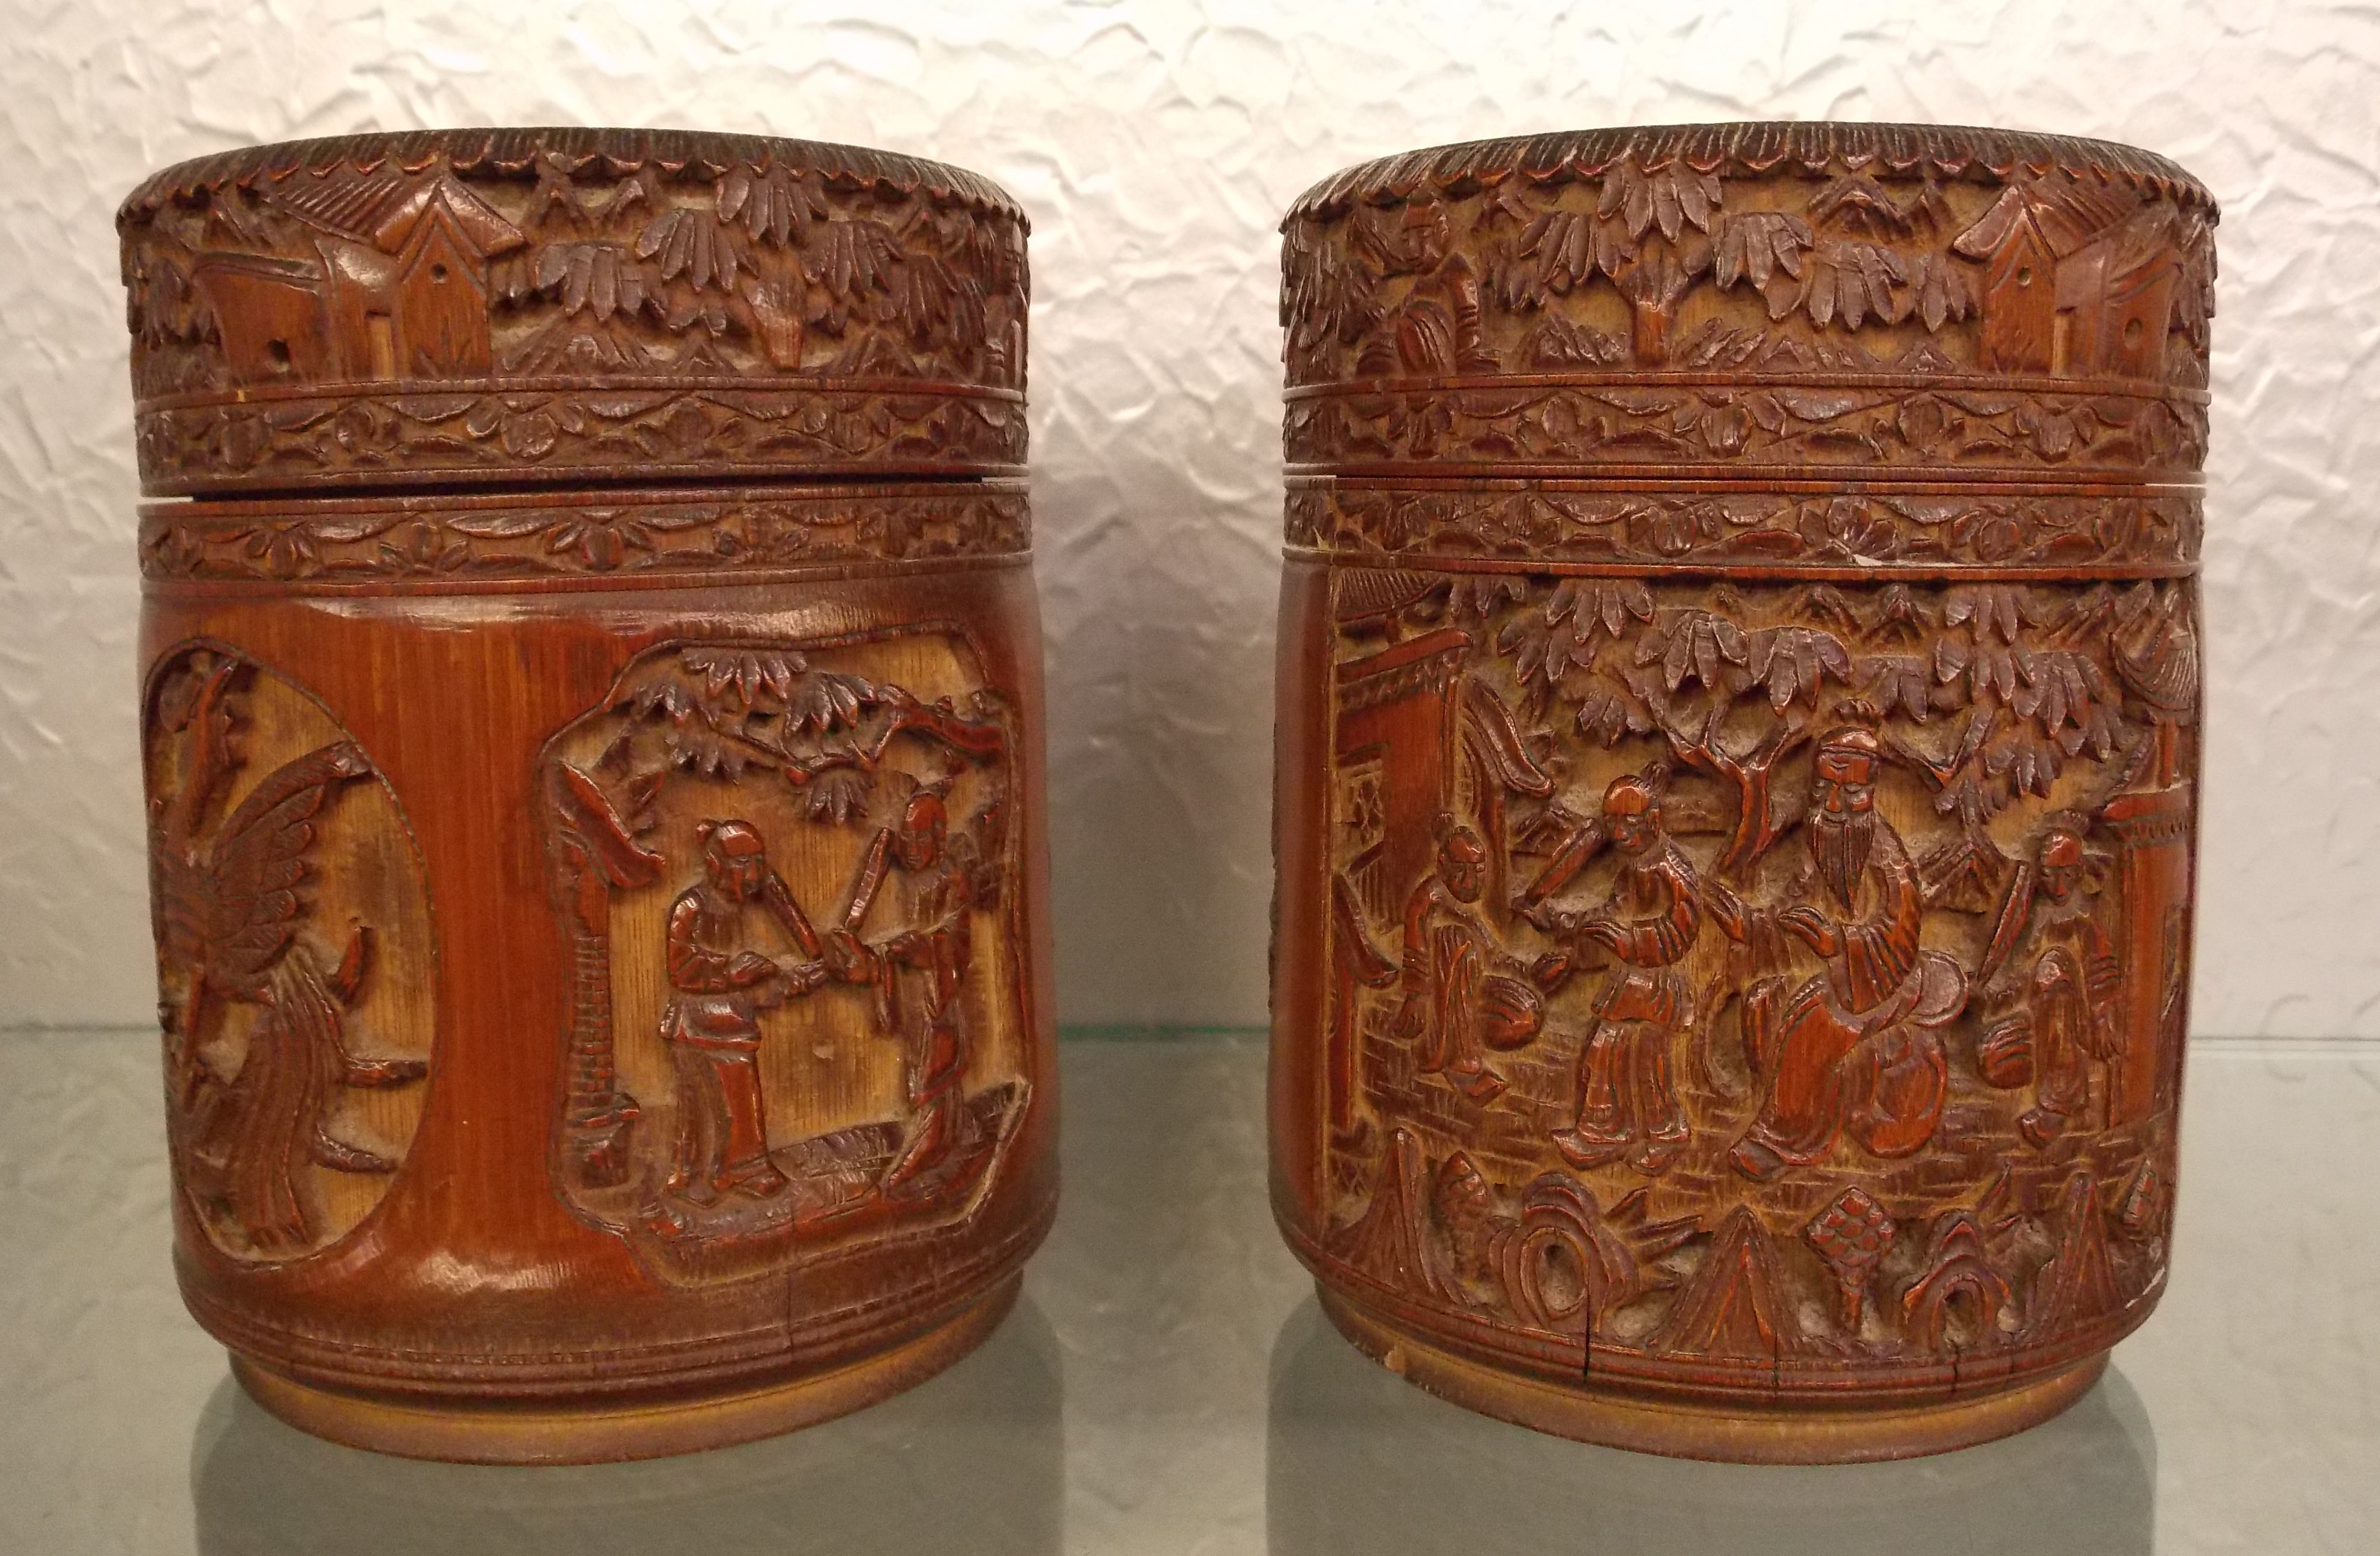 PAIR OF CARVED BAMBOO CYLINDRICAL JARS WITH COVERS A/F HEIGHT 16CM